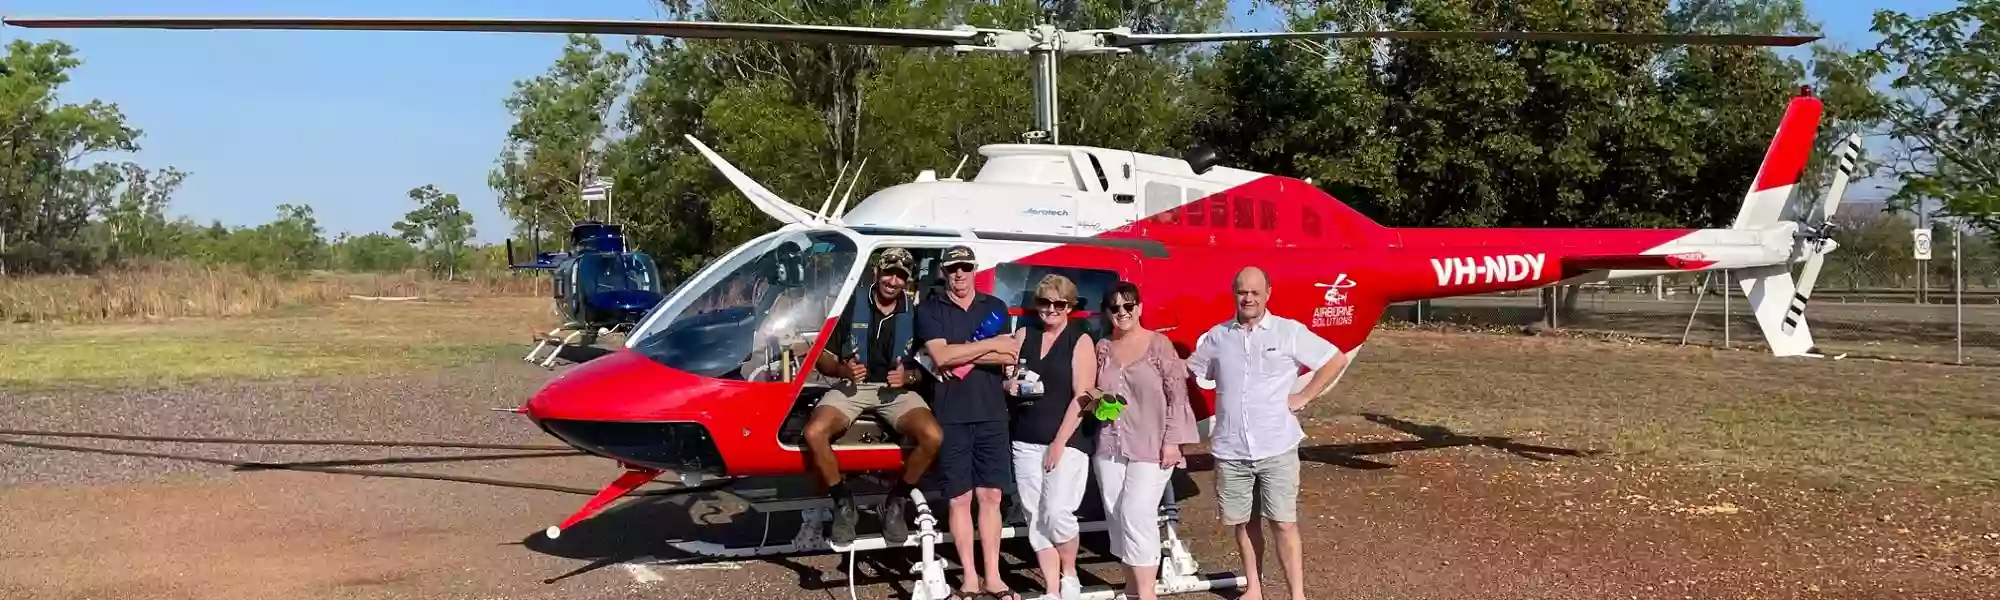 Airborne Solutions Toowoomba Helicopter Services